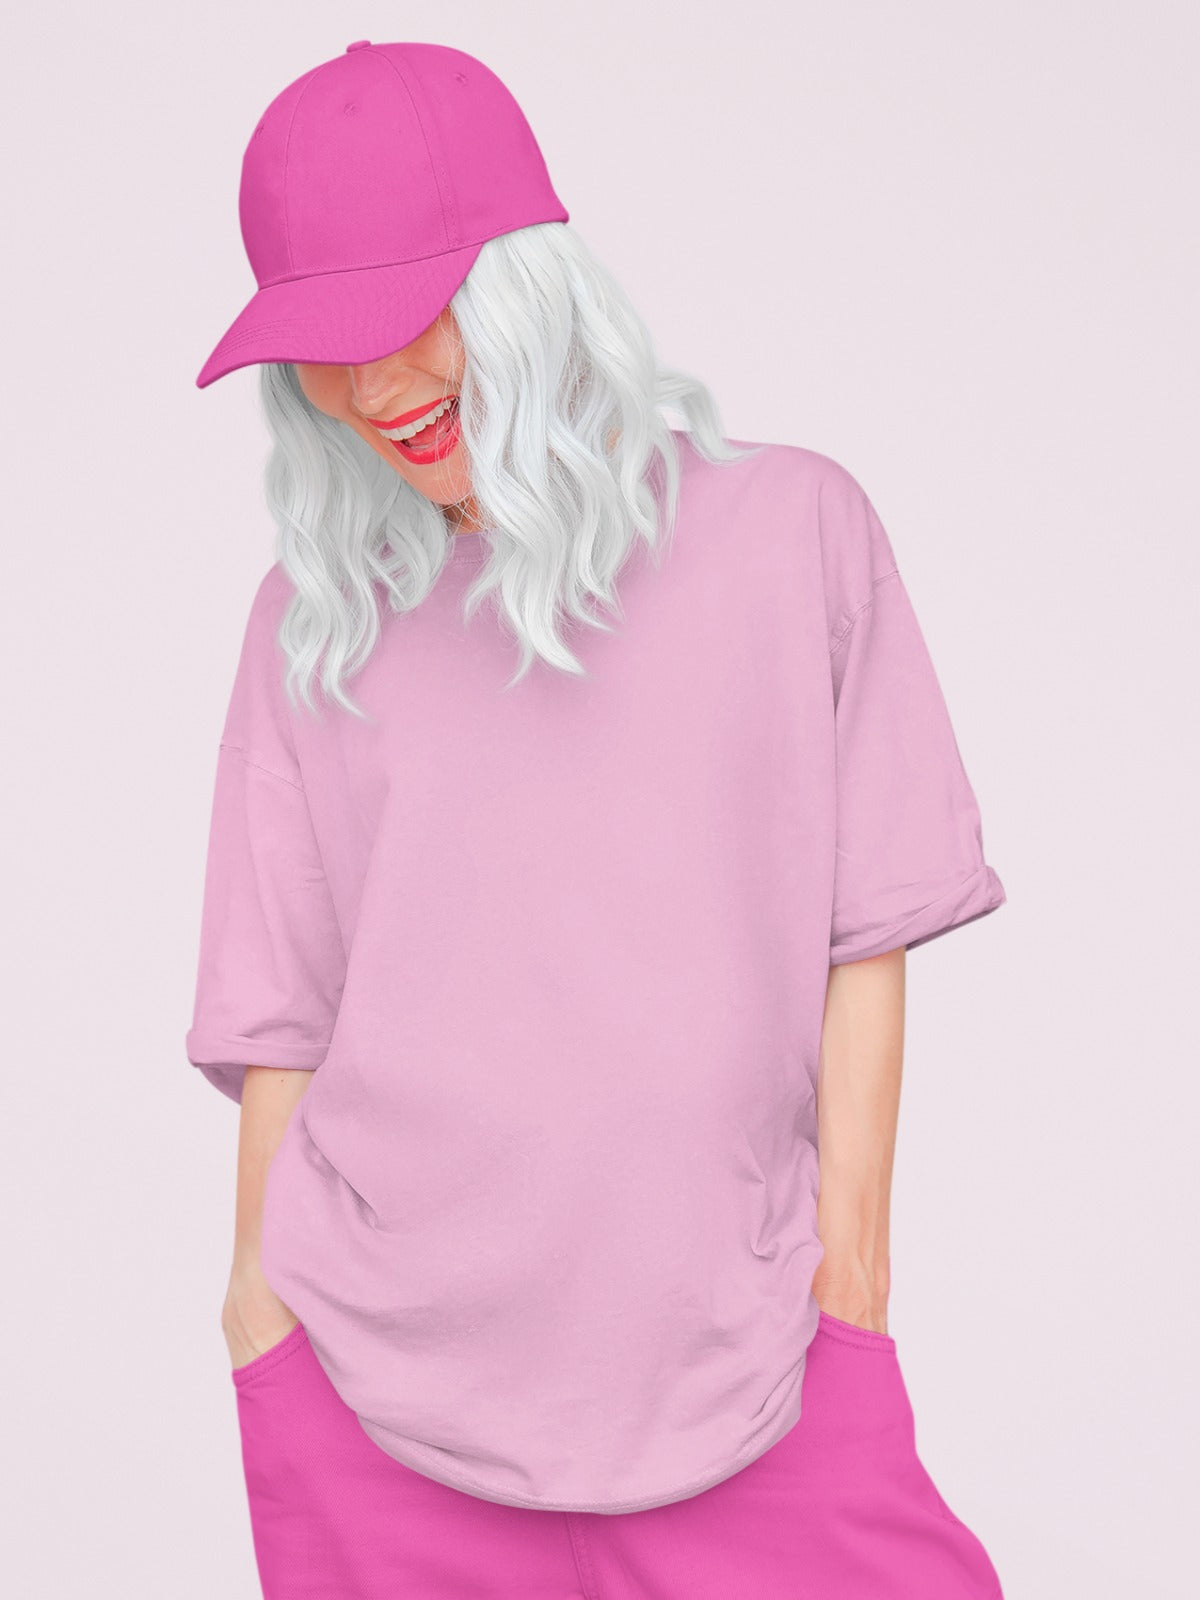  In this captivating image, a girl with striking white hair exudes confidence and style. She's adorned in our Premium Heavyweight Baby Pink Oversized Tee, which drapes effortlessly, oozing comfort and fashion-forward charm. To complete her look, she sports a chic dark pink cap and matching pants. Her attire effortlessly blends comfort with a trendy aesthetic, making a bold fashion statement.